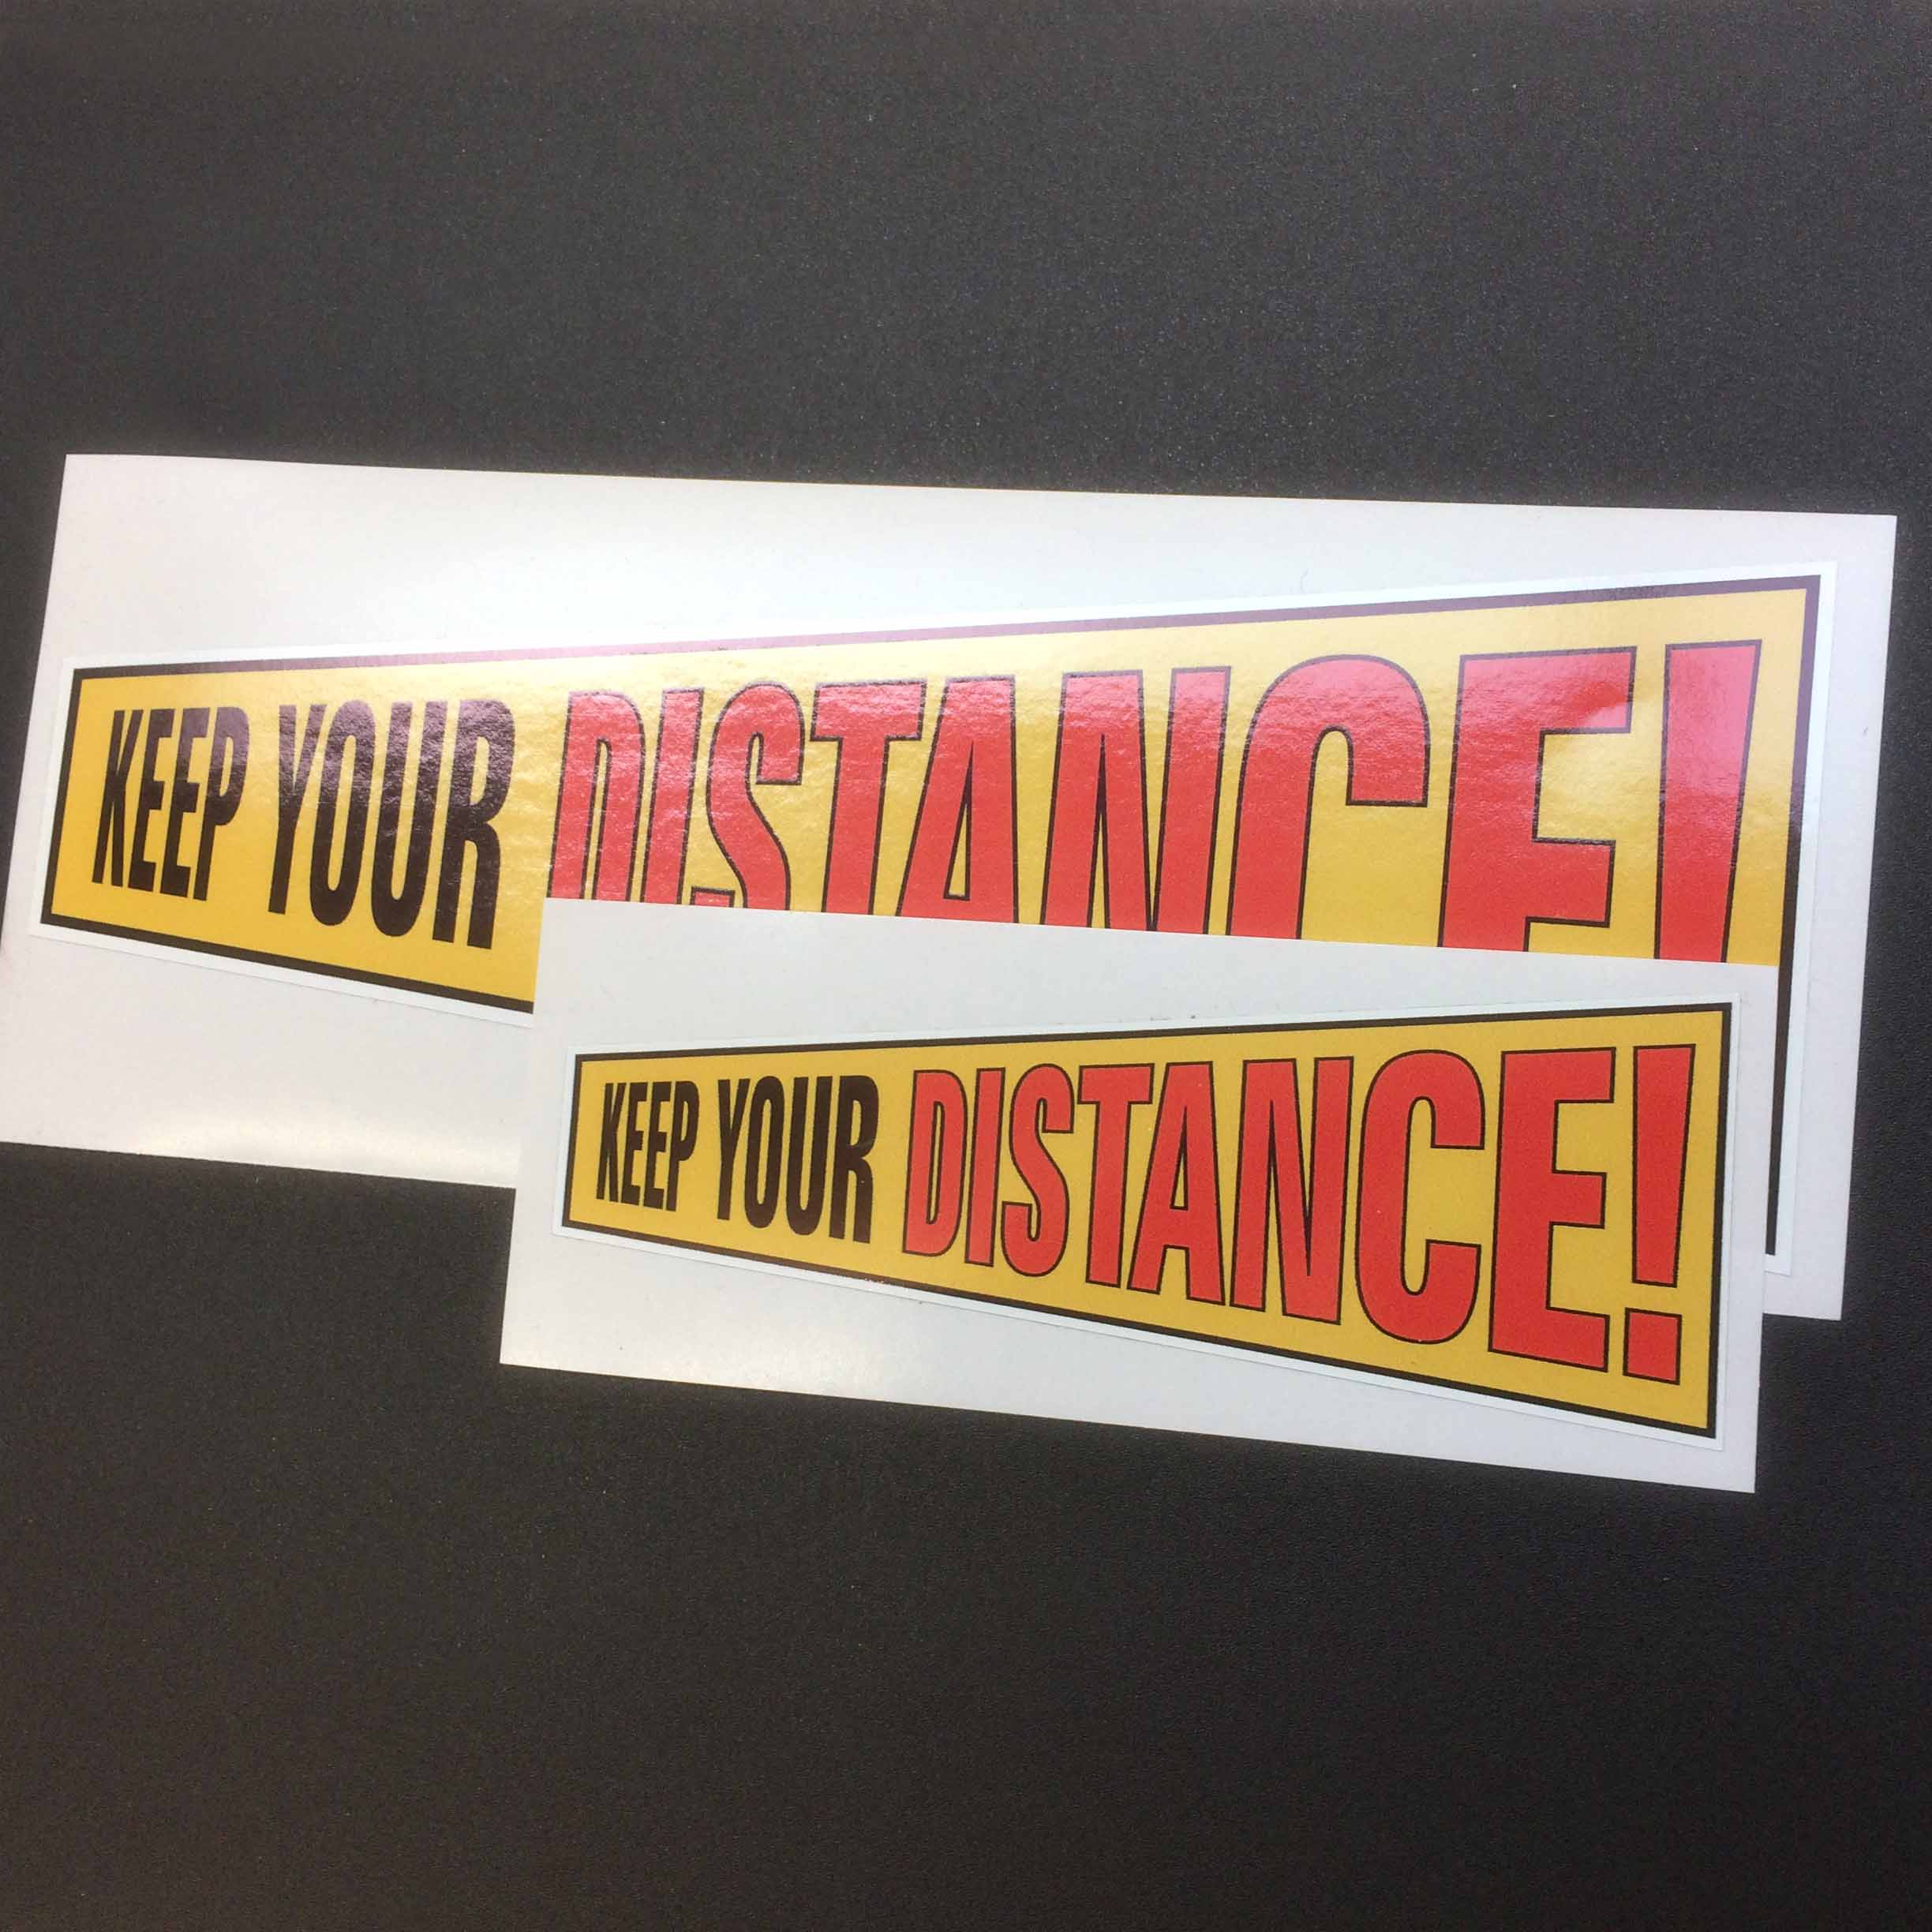 KEEP YOUR DISTANCE STICKER - 2 SIZES AVAILABLE. Keep Your in black lettering. Distance! in red lettering. On a yellow background.